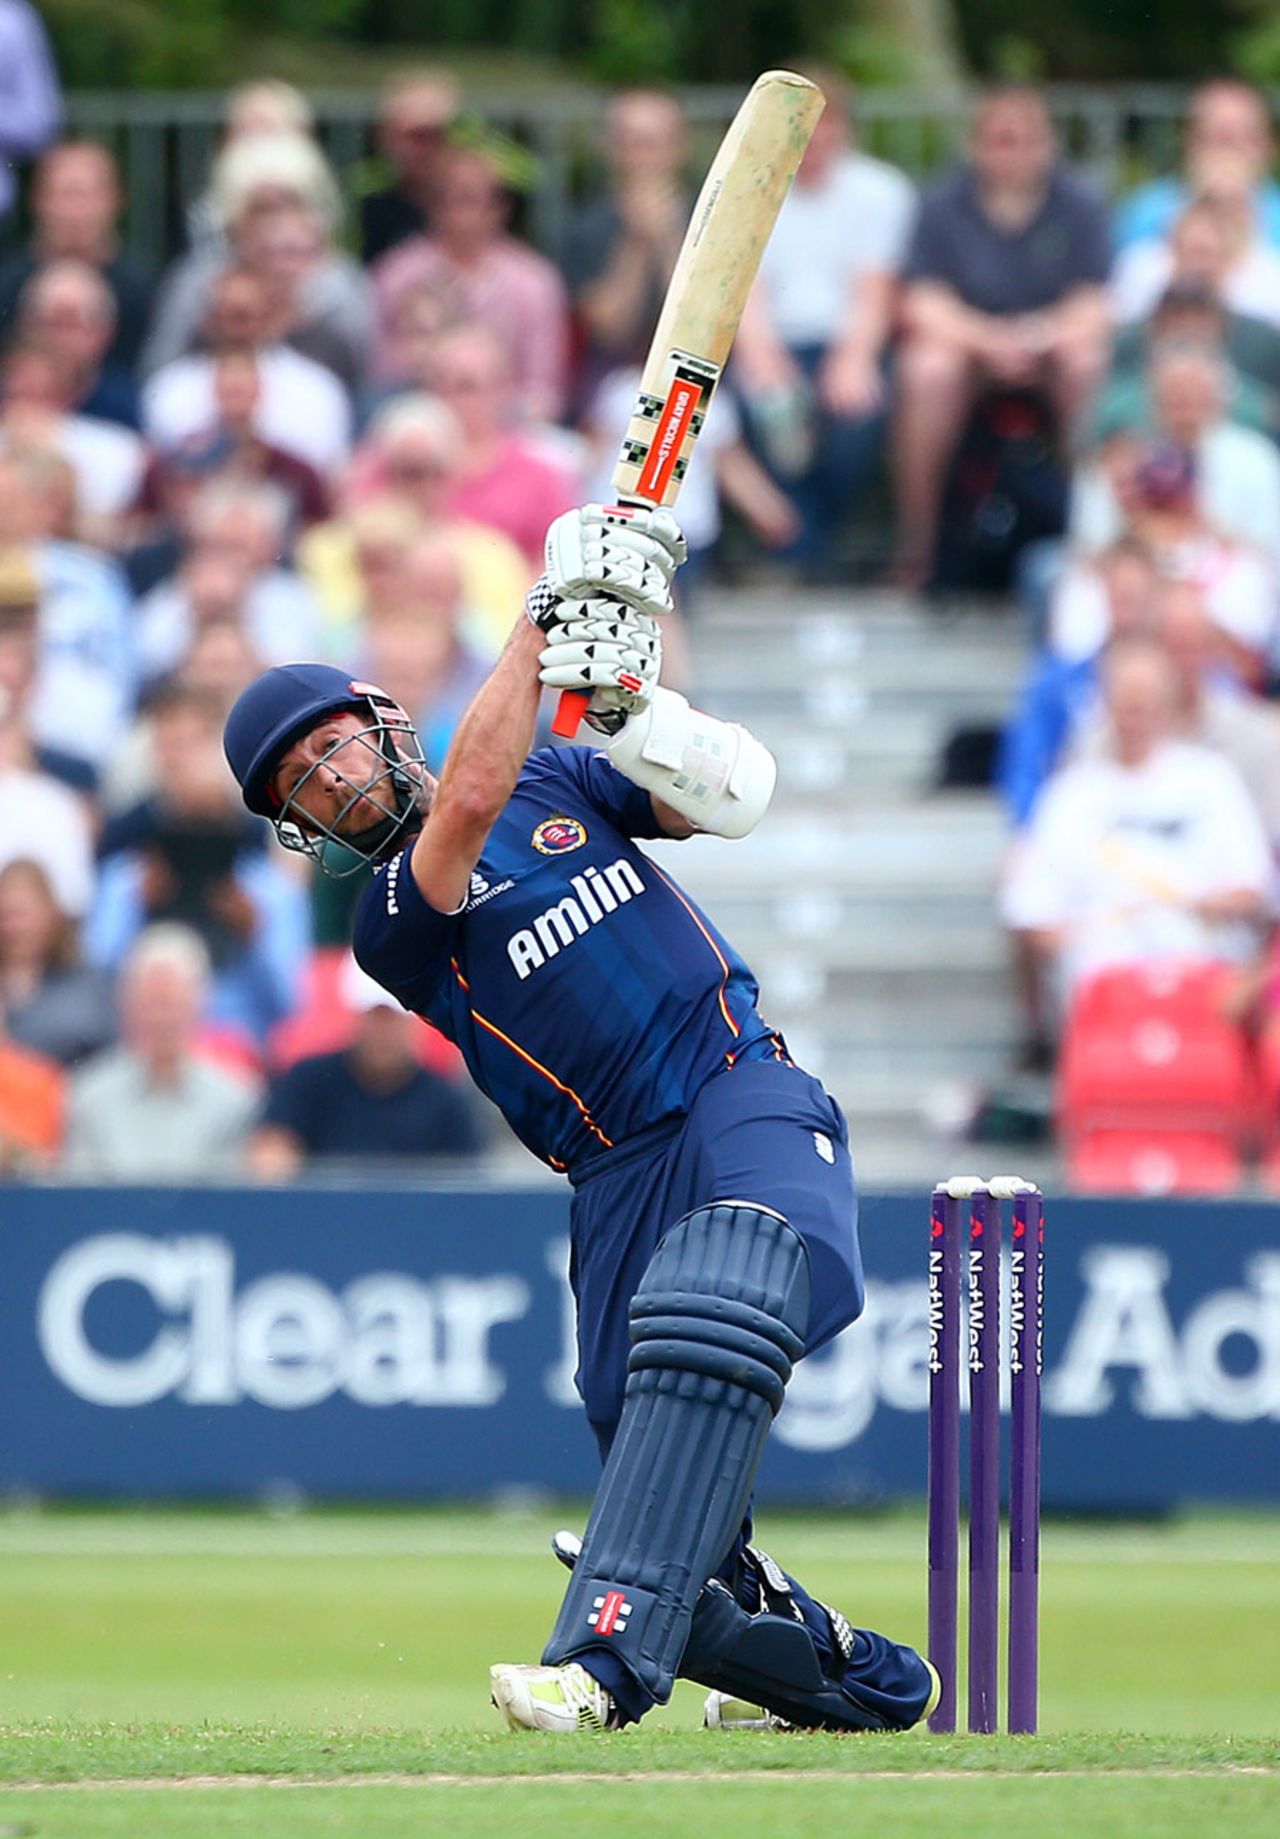 James Foster swings on his way to 36 in 21 balls, Essex v Kent, NatWest T20 Blast, Colchester, July 12, 2014